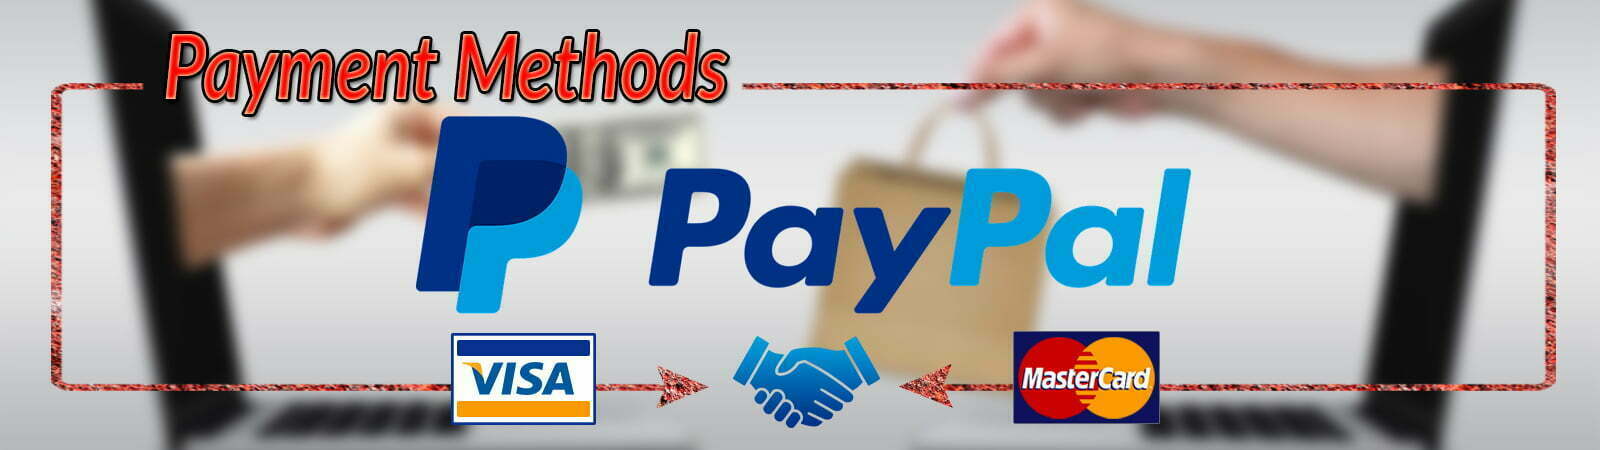 Clipping Path Store Payment Methods